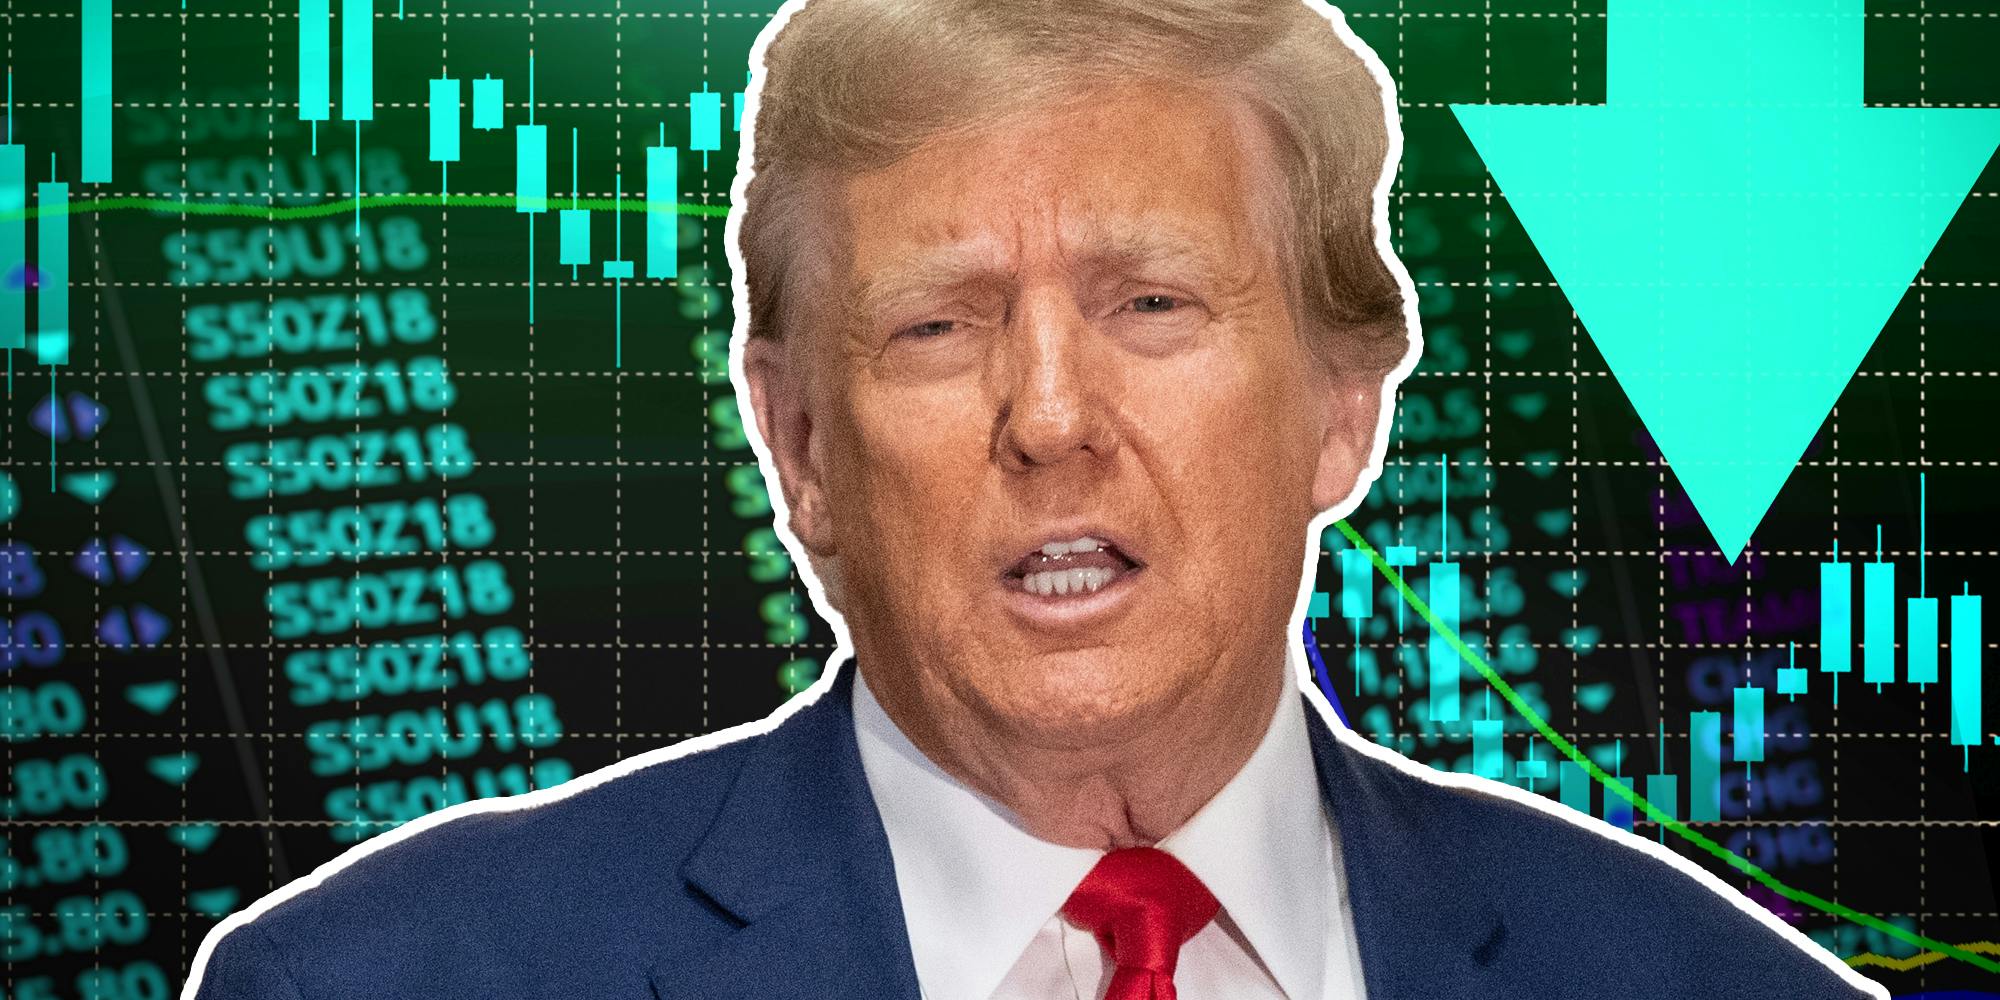 Donald Trump in front of stock graphics